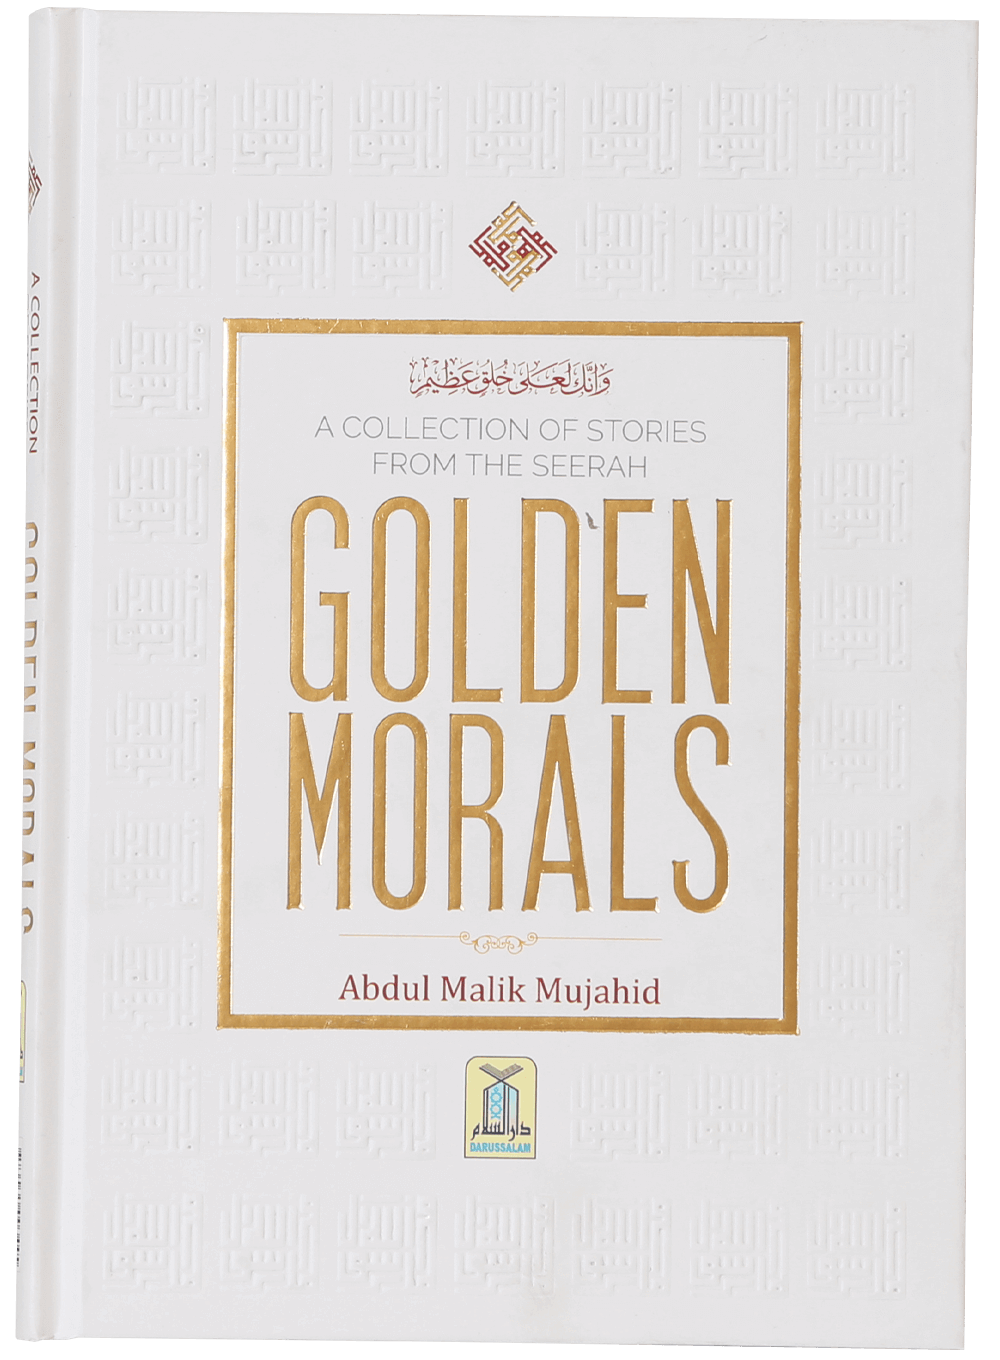 Golden Morals: A Collection of Stories from the Seerah